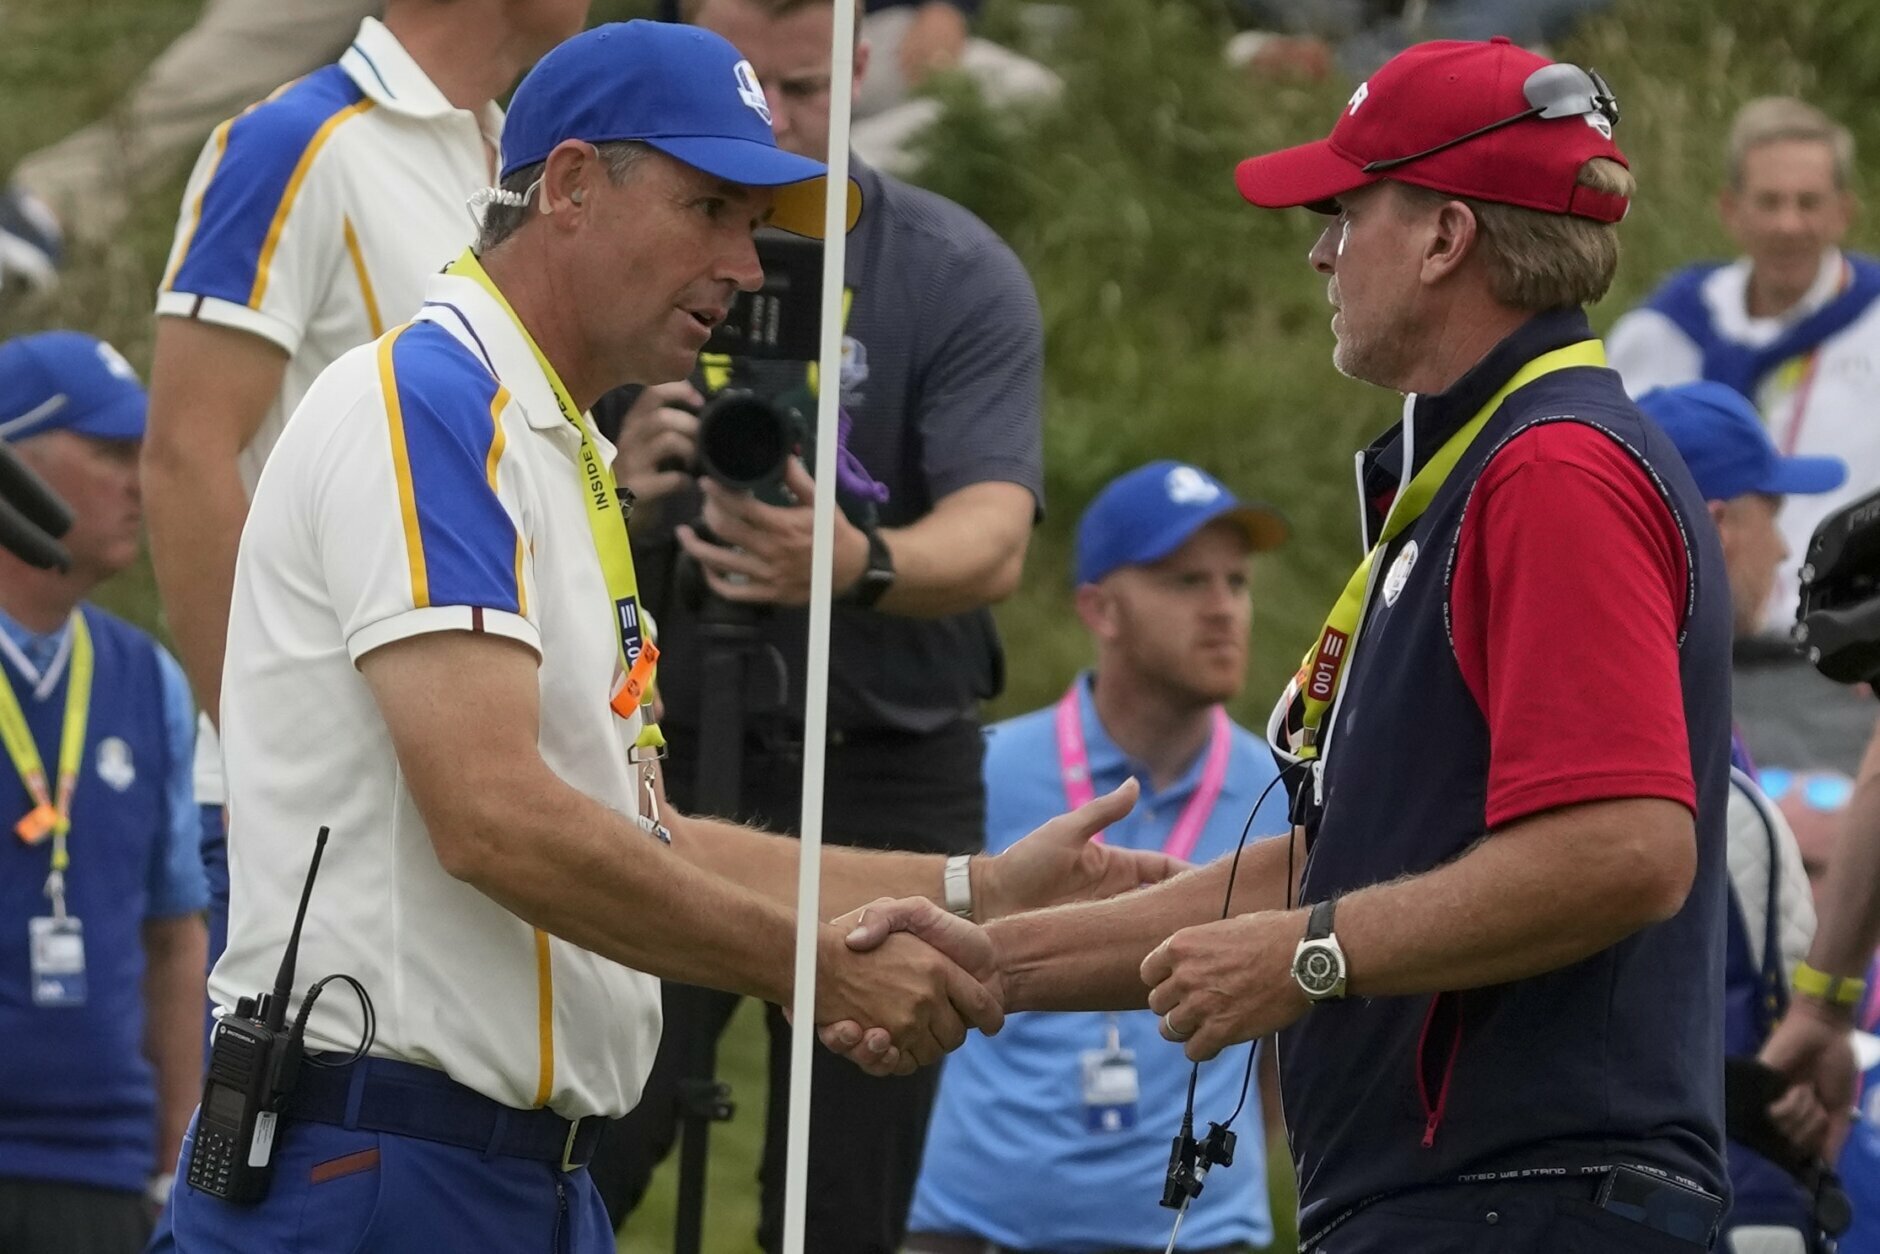 Americans win Ryder Cup in a rout, send Europe a message pic